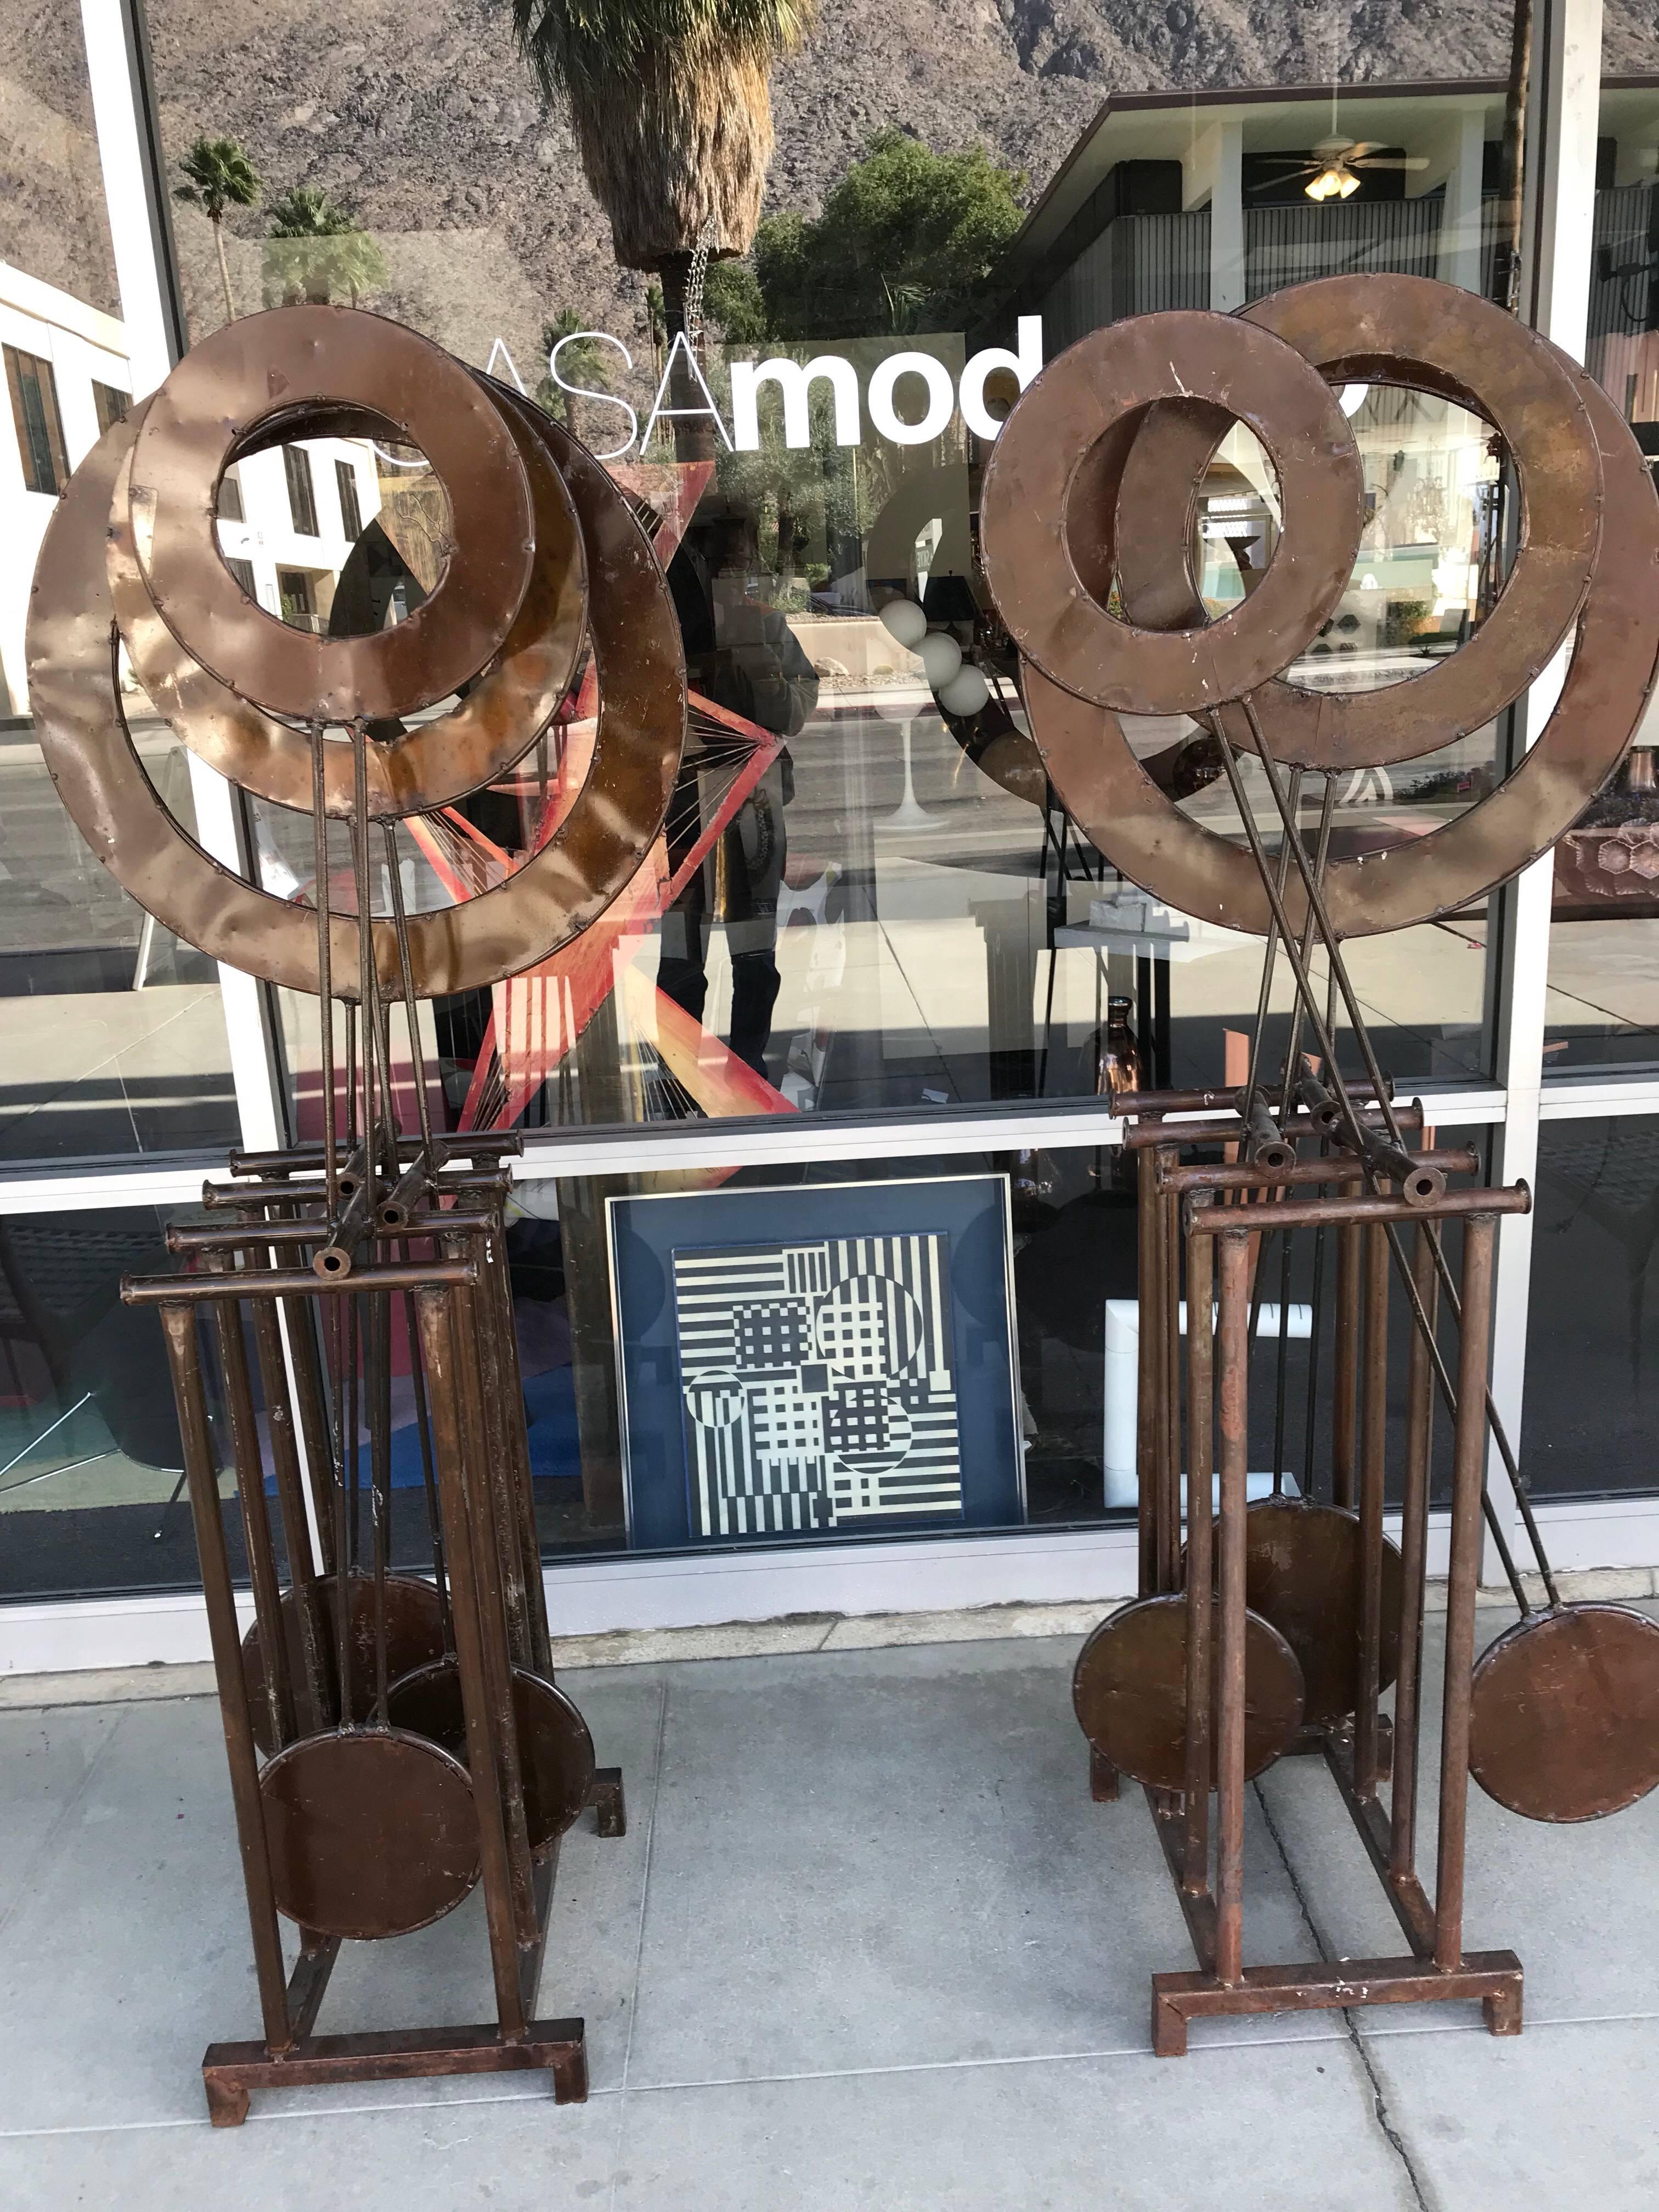 These metal kinetic sculptures made circa 1990, were from a Palm Springs Estate and used outside in a covered entrance (one on each side of their double doors) They have a brown Brutalist colored metal finish. They move with wind or can be started